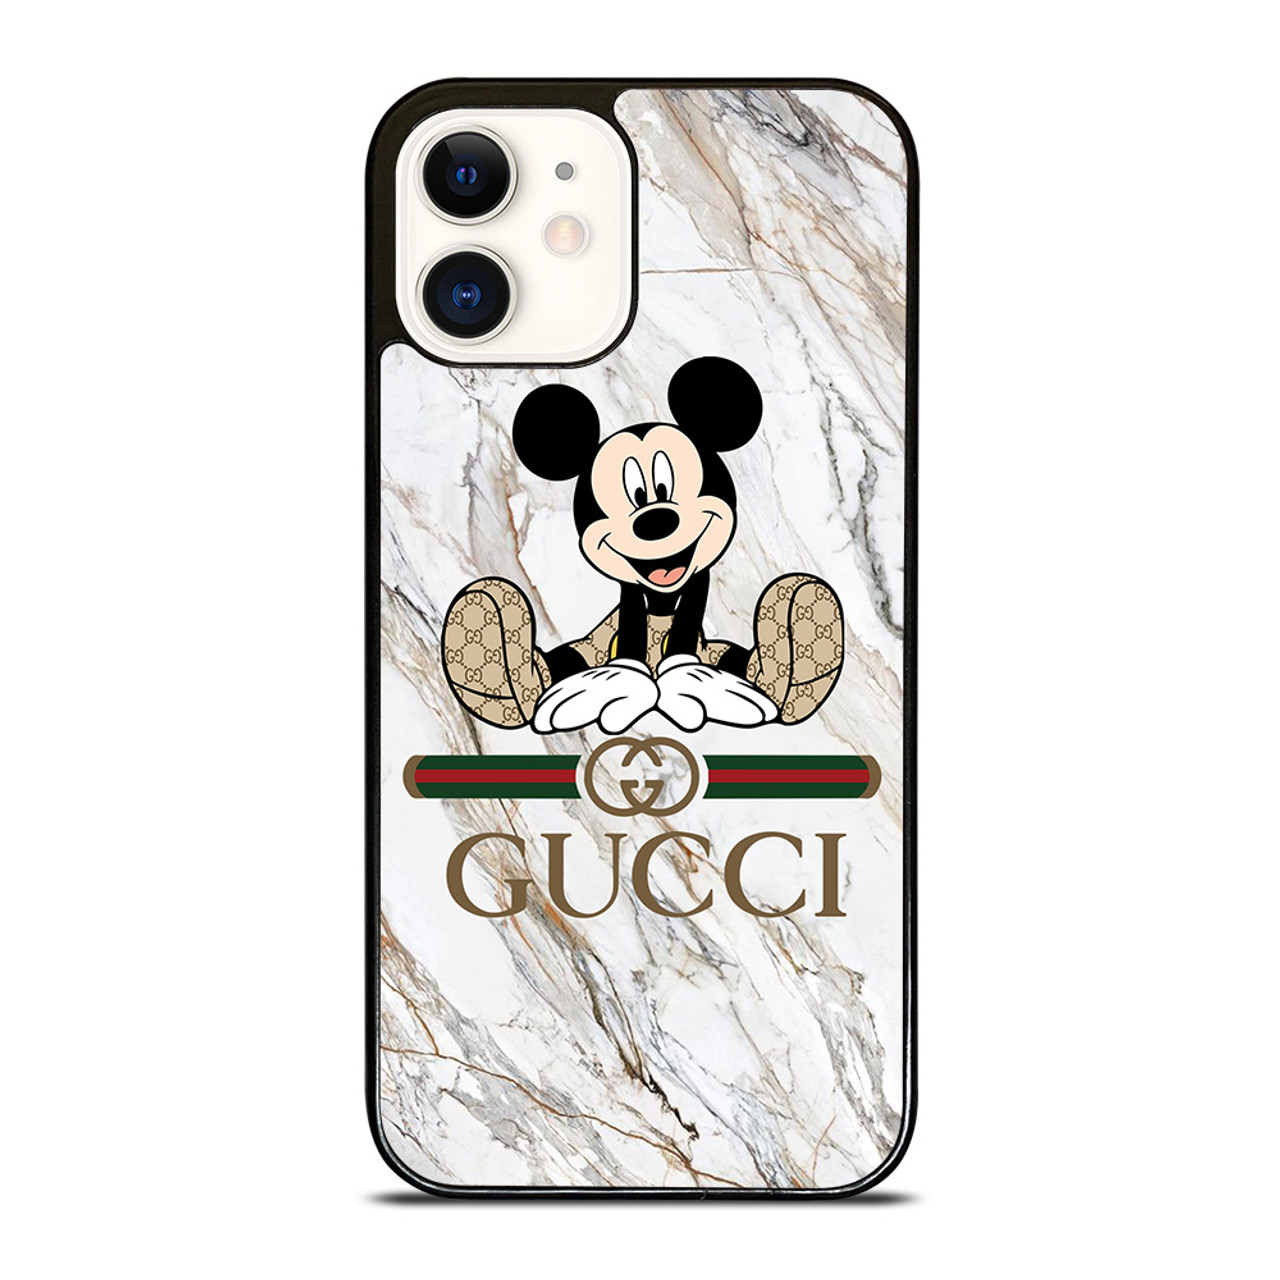 GUCCI MICKEY MOUSE Case Cover